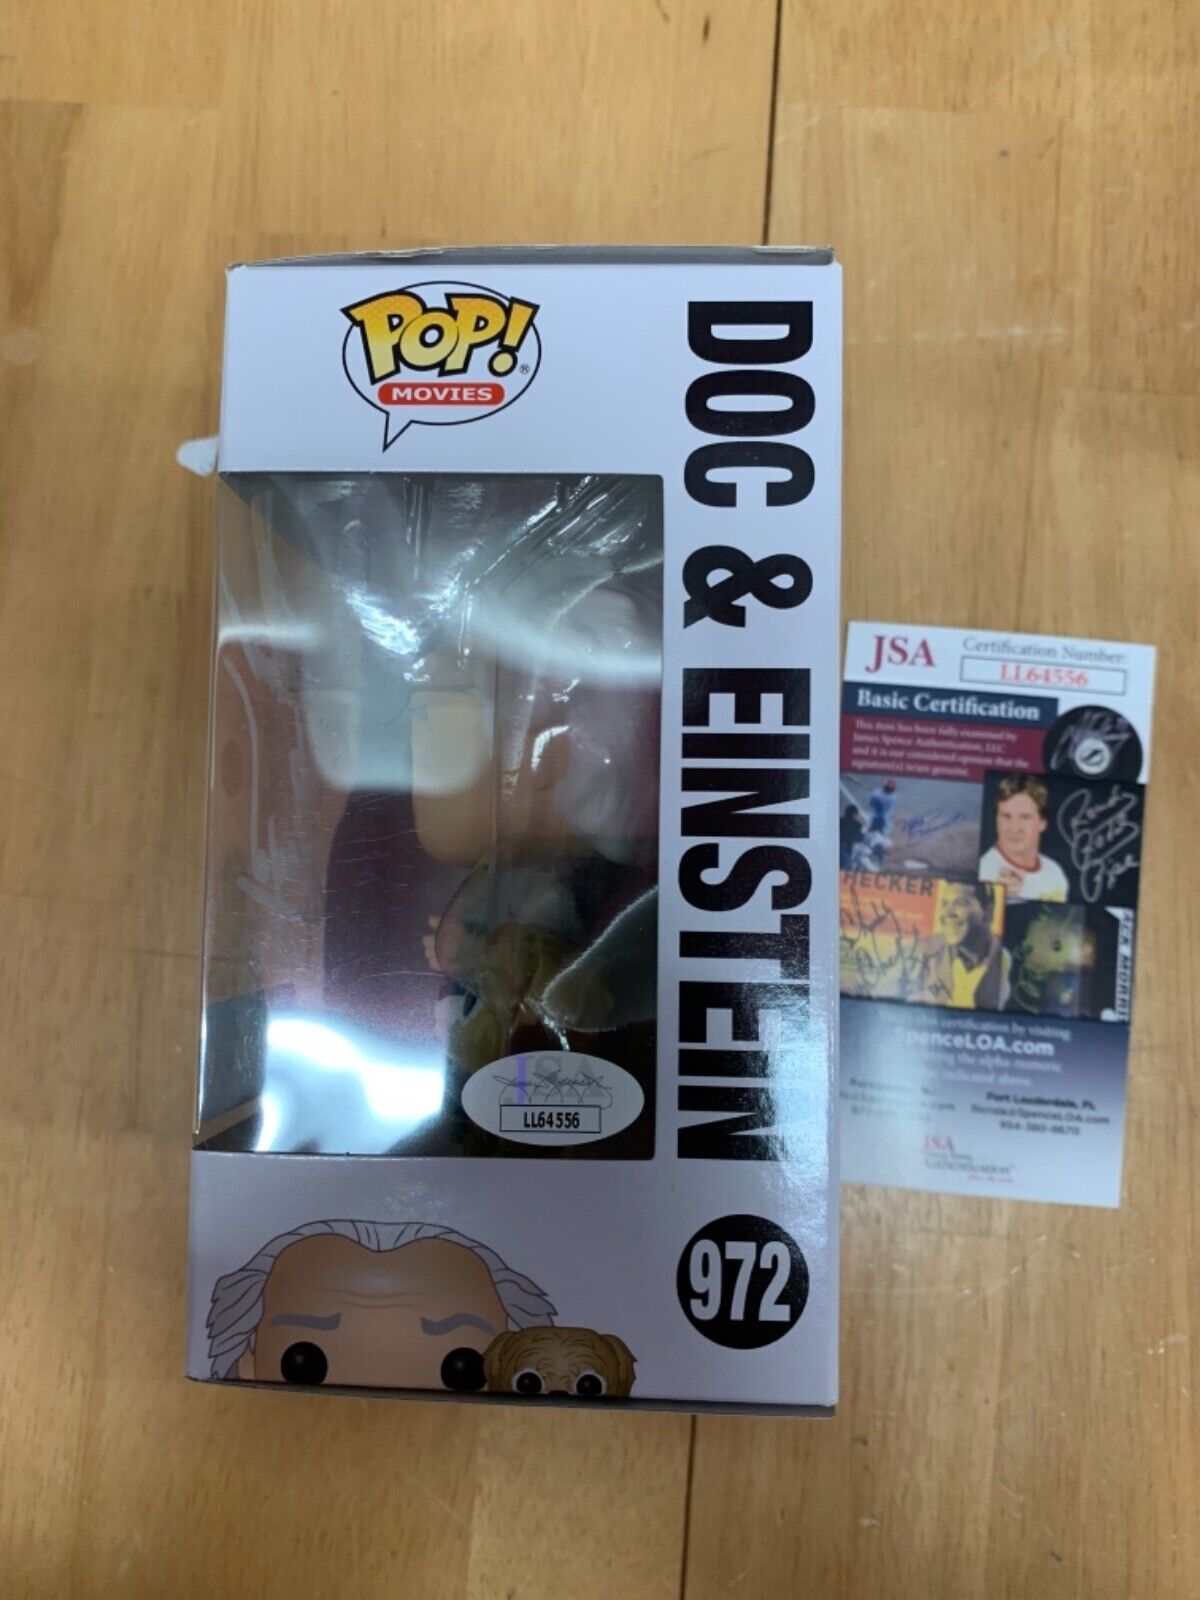 Funko Pop Autographed Christopher Lloyd Back to the Future “Doc Einstein” JSA